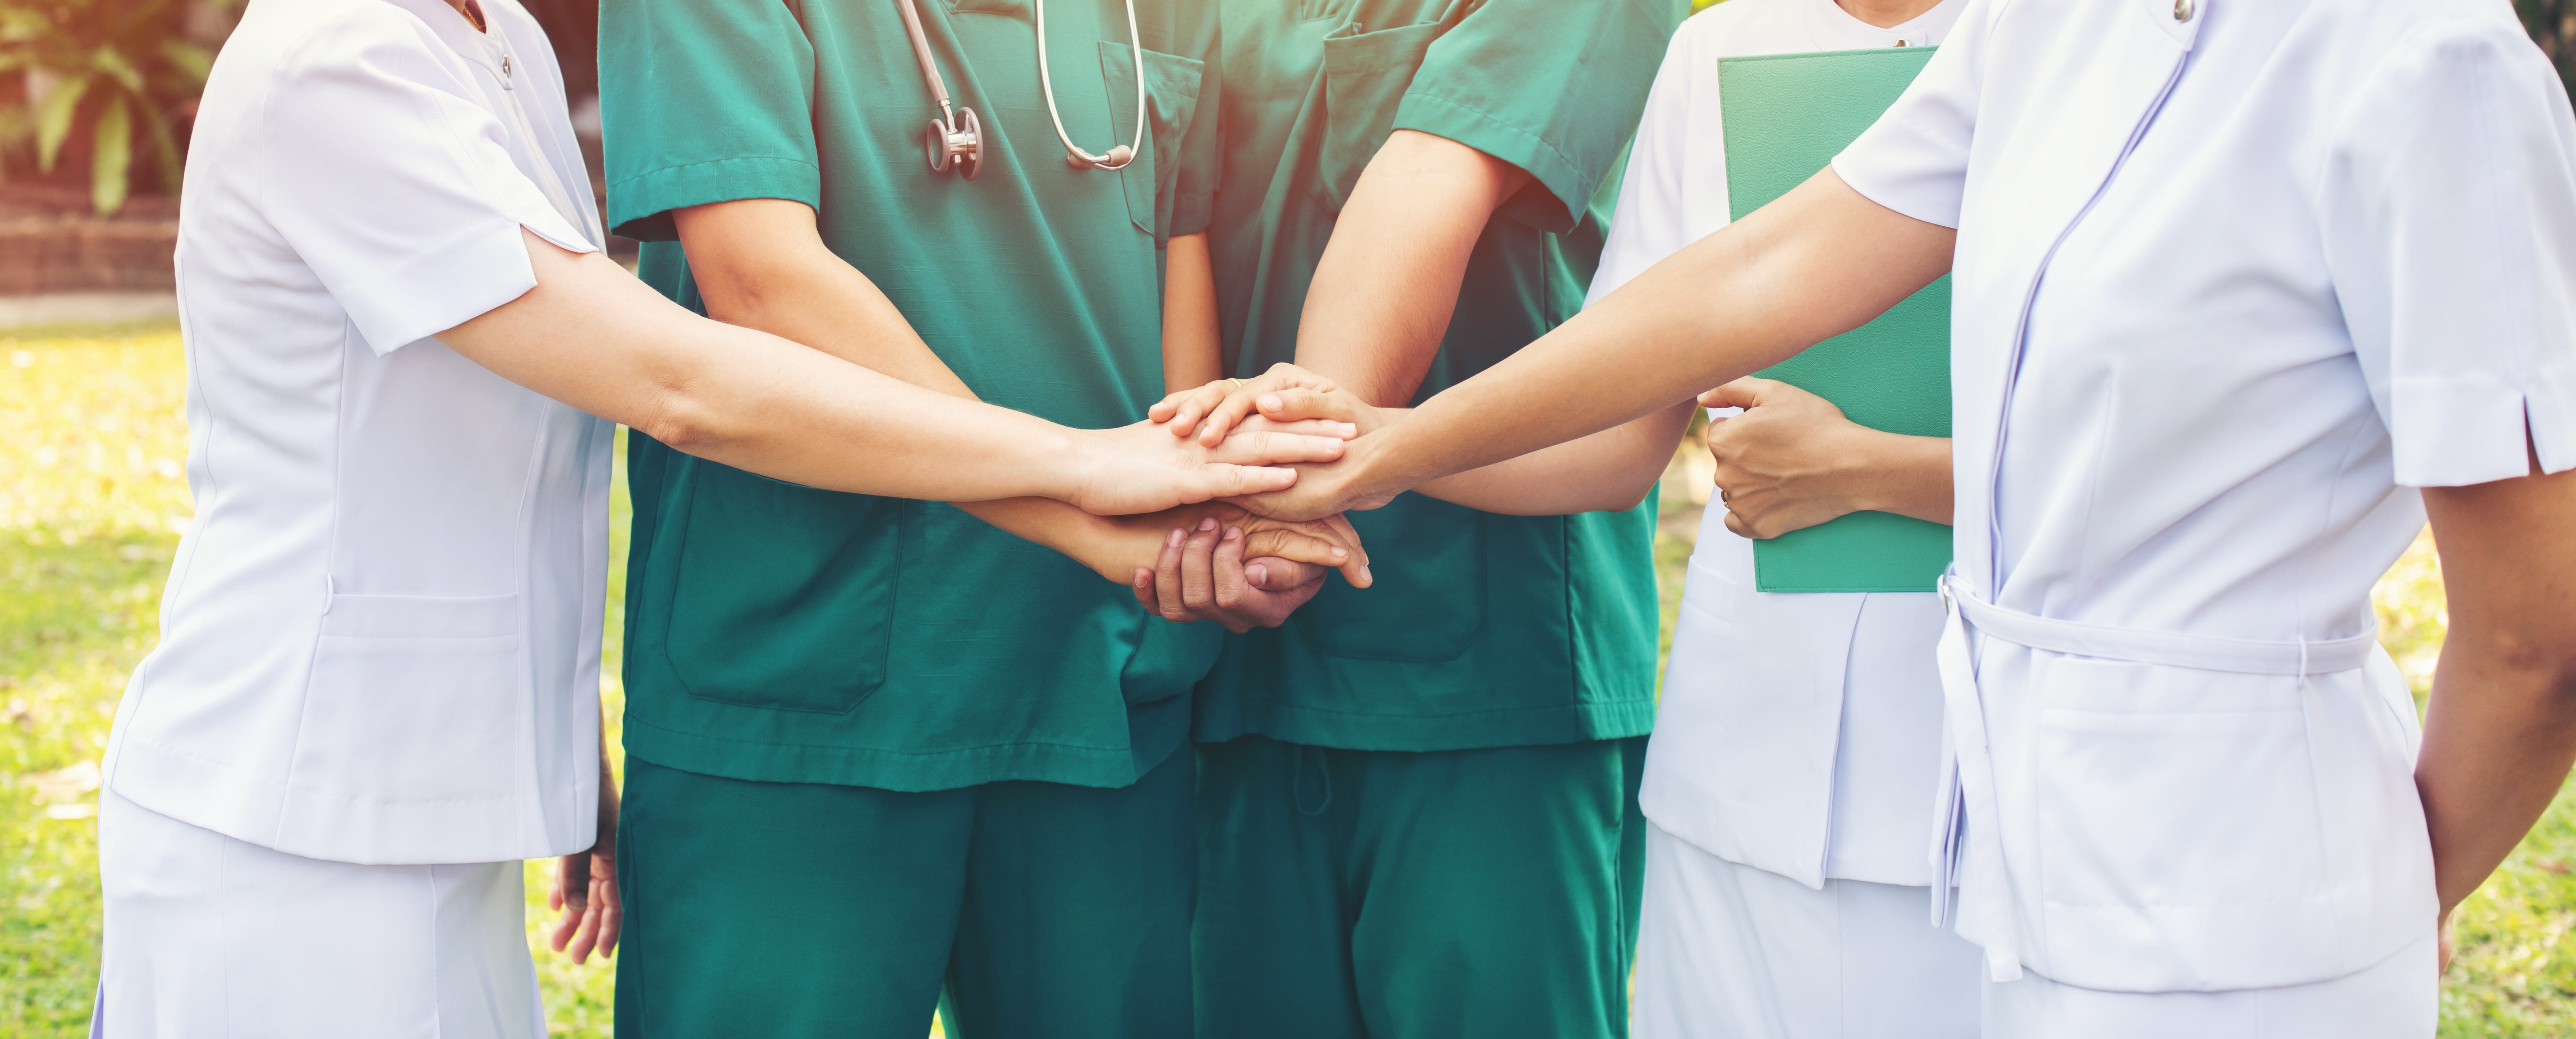 Healthcare team joining hands outside